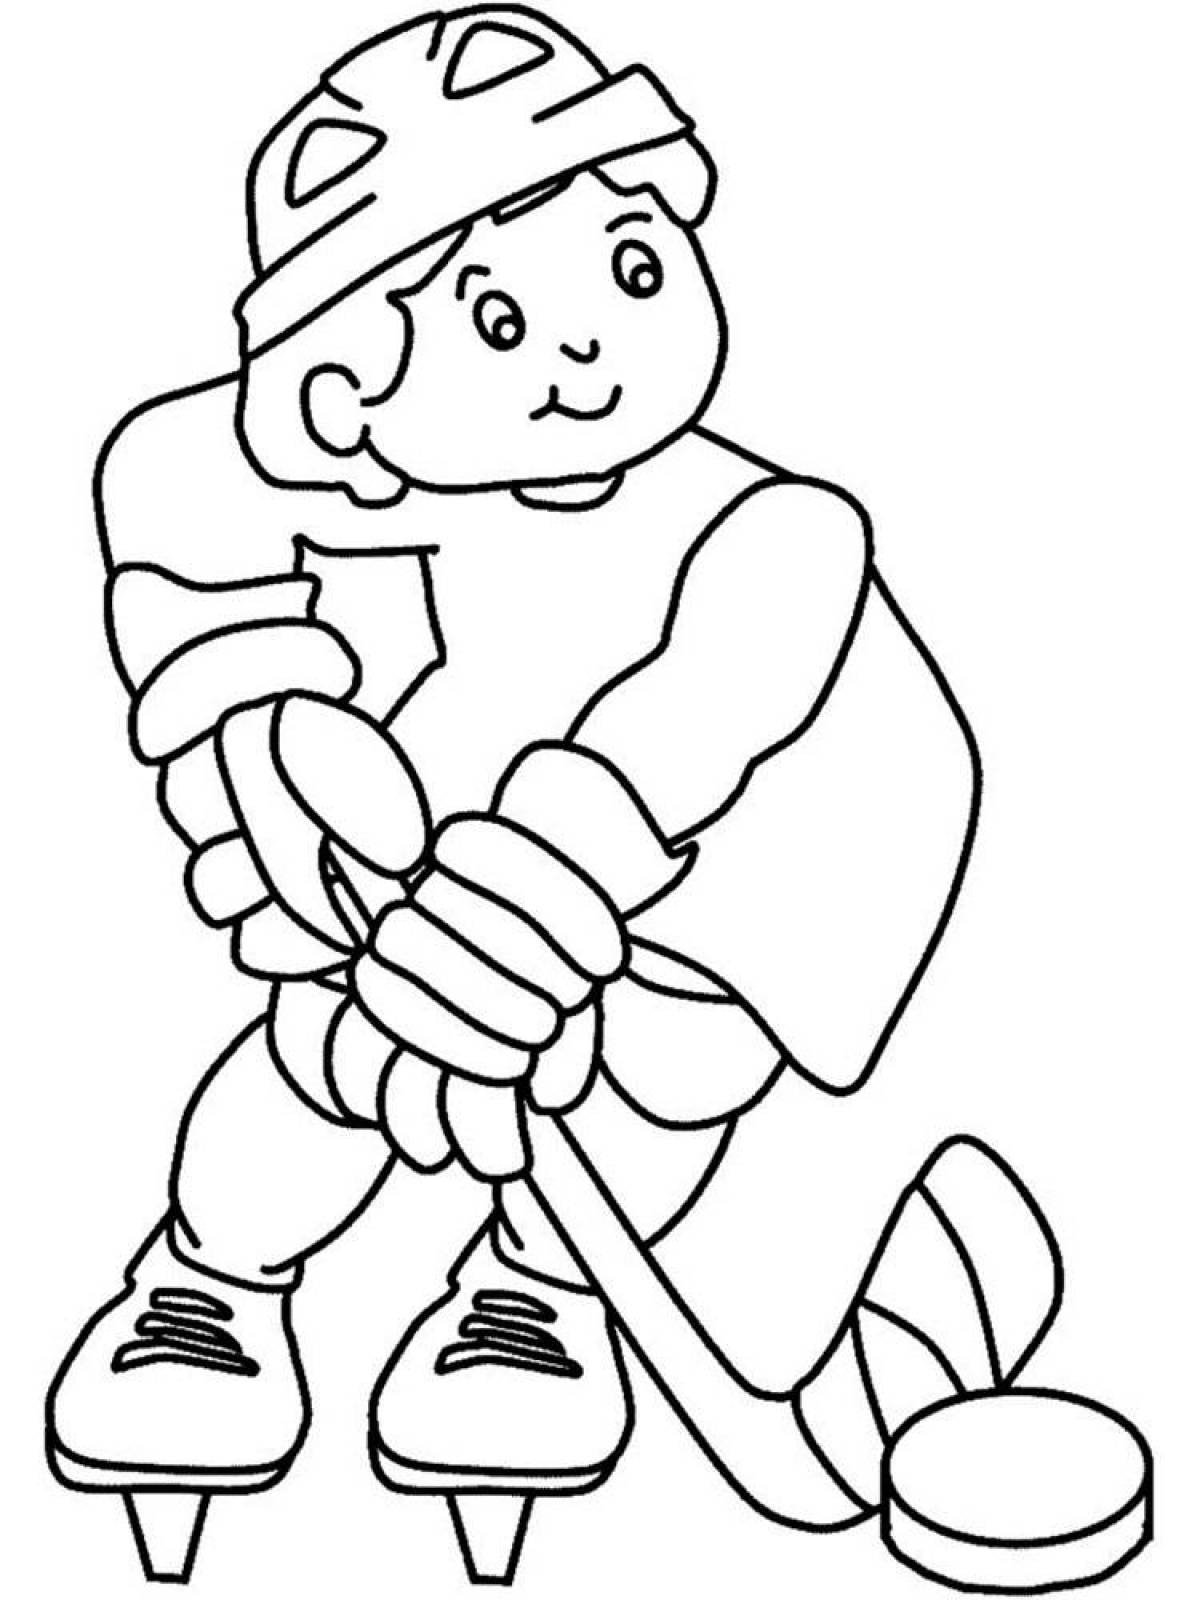 Dynamic sports coloring book for kids